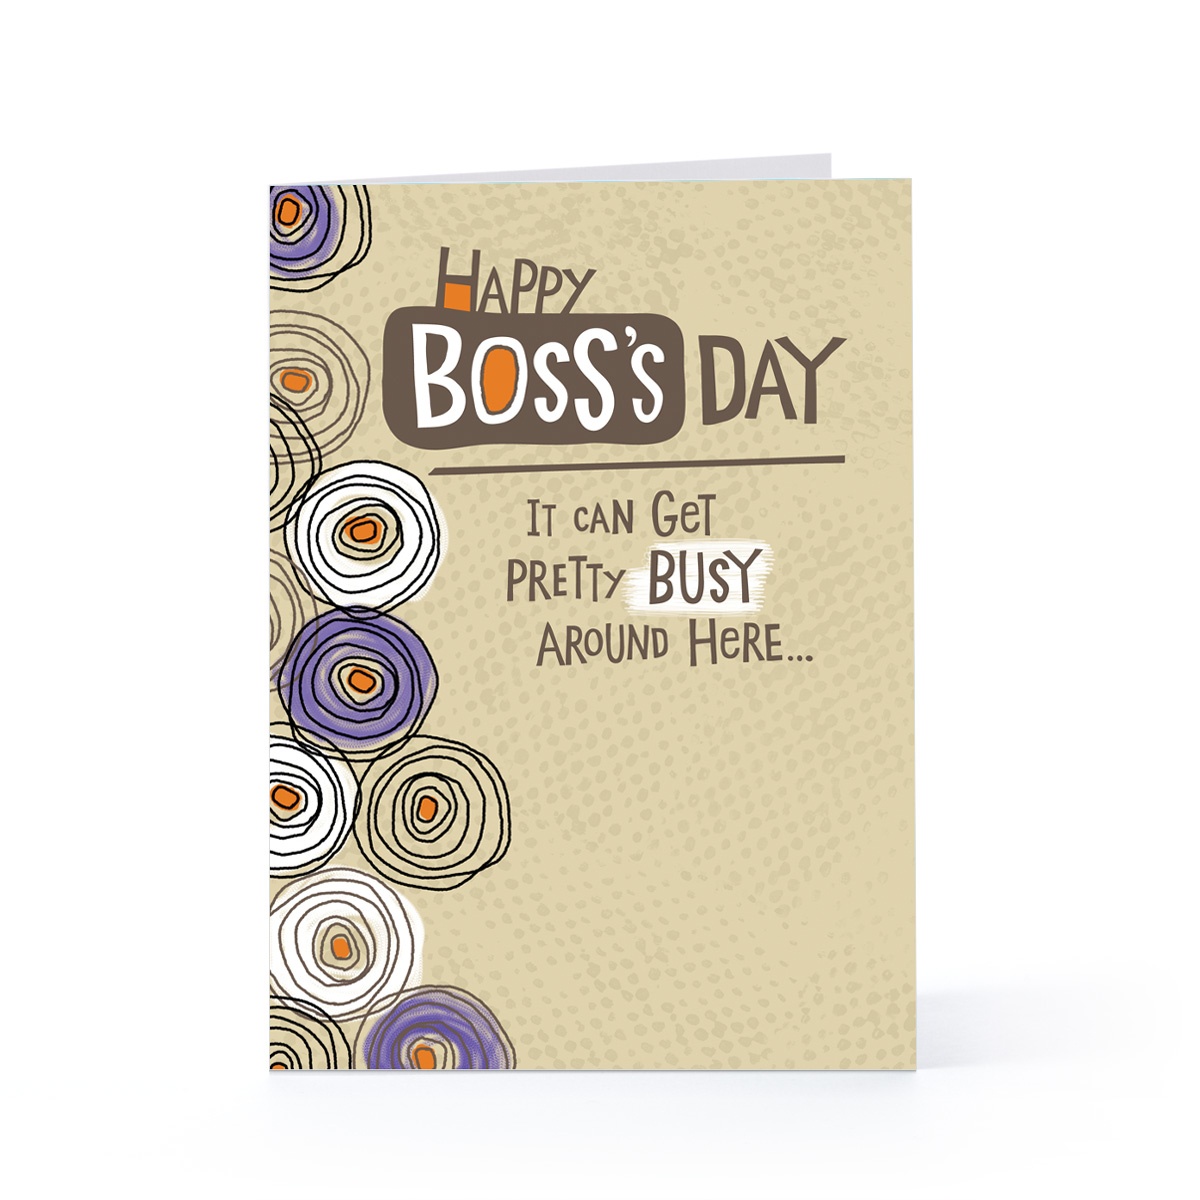 boss-s-day-card-bosses-day-card-printable-card-boss-lady-etsy